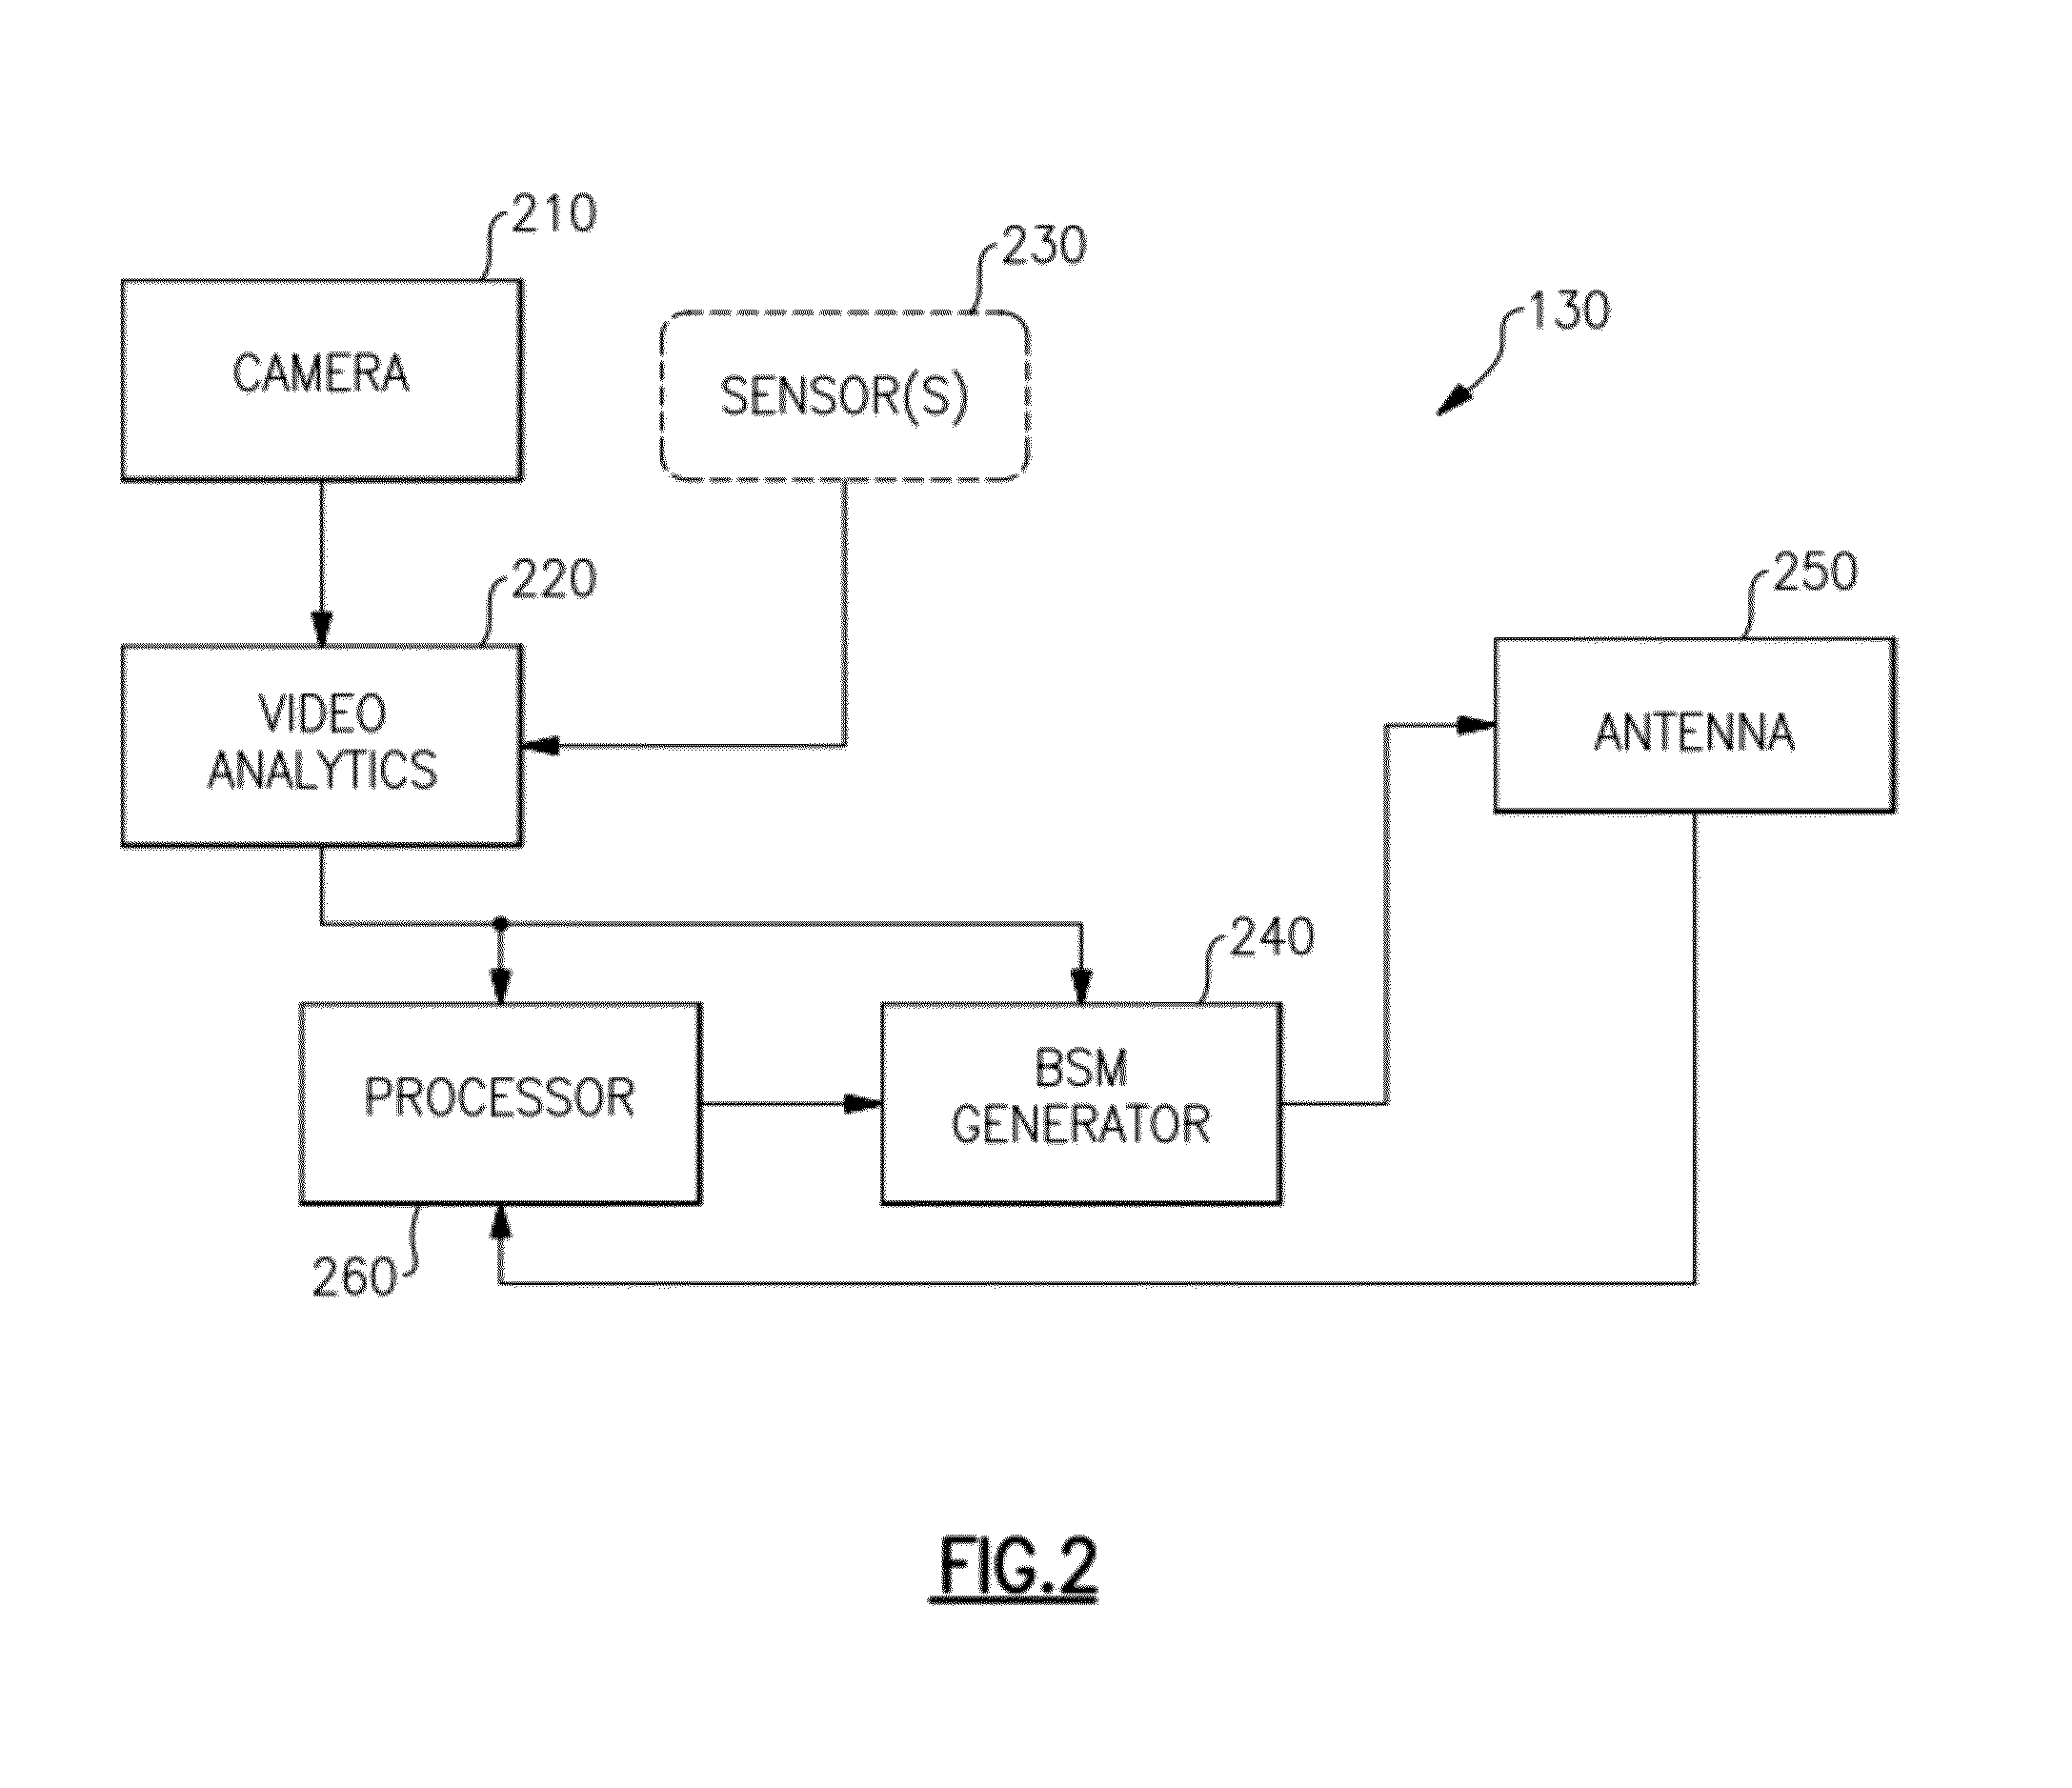 Method and apparatus for generating infrastructure-based basic safety message data